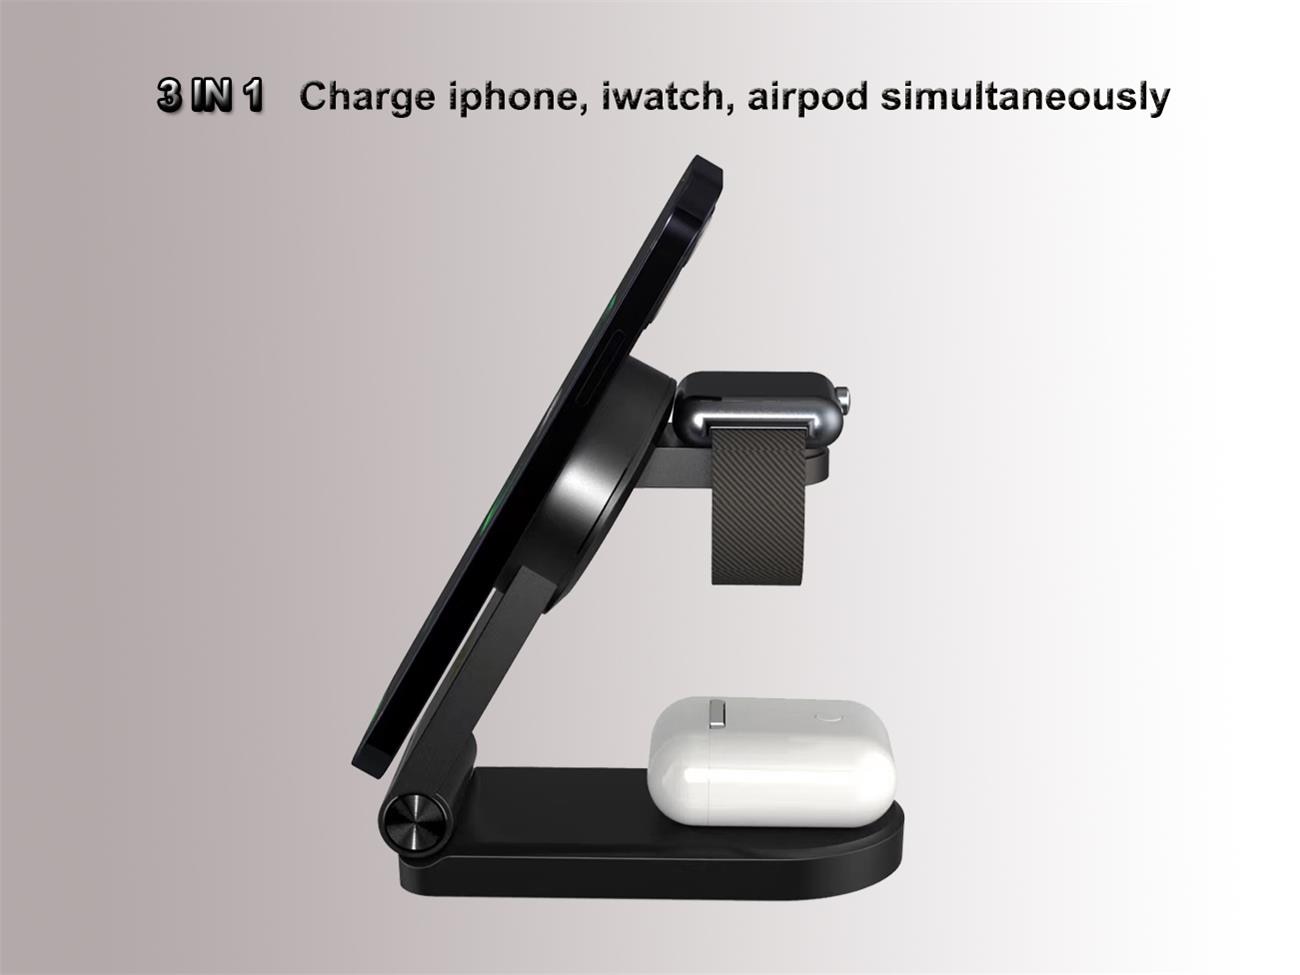 Qi2 Magnetic Wireless Charger 3 In 1 Multifunction Foldable For Iphone Iwatch Airpod